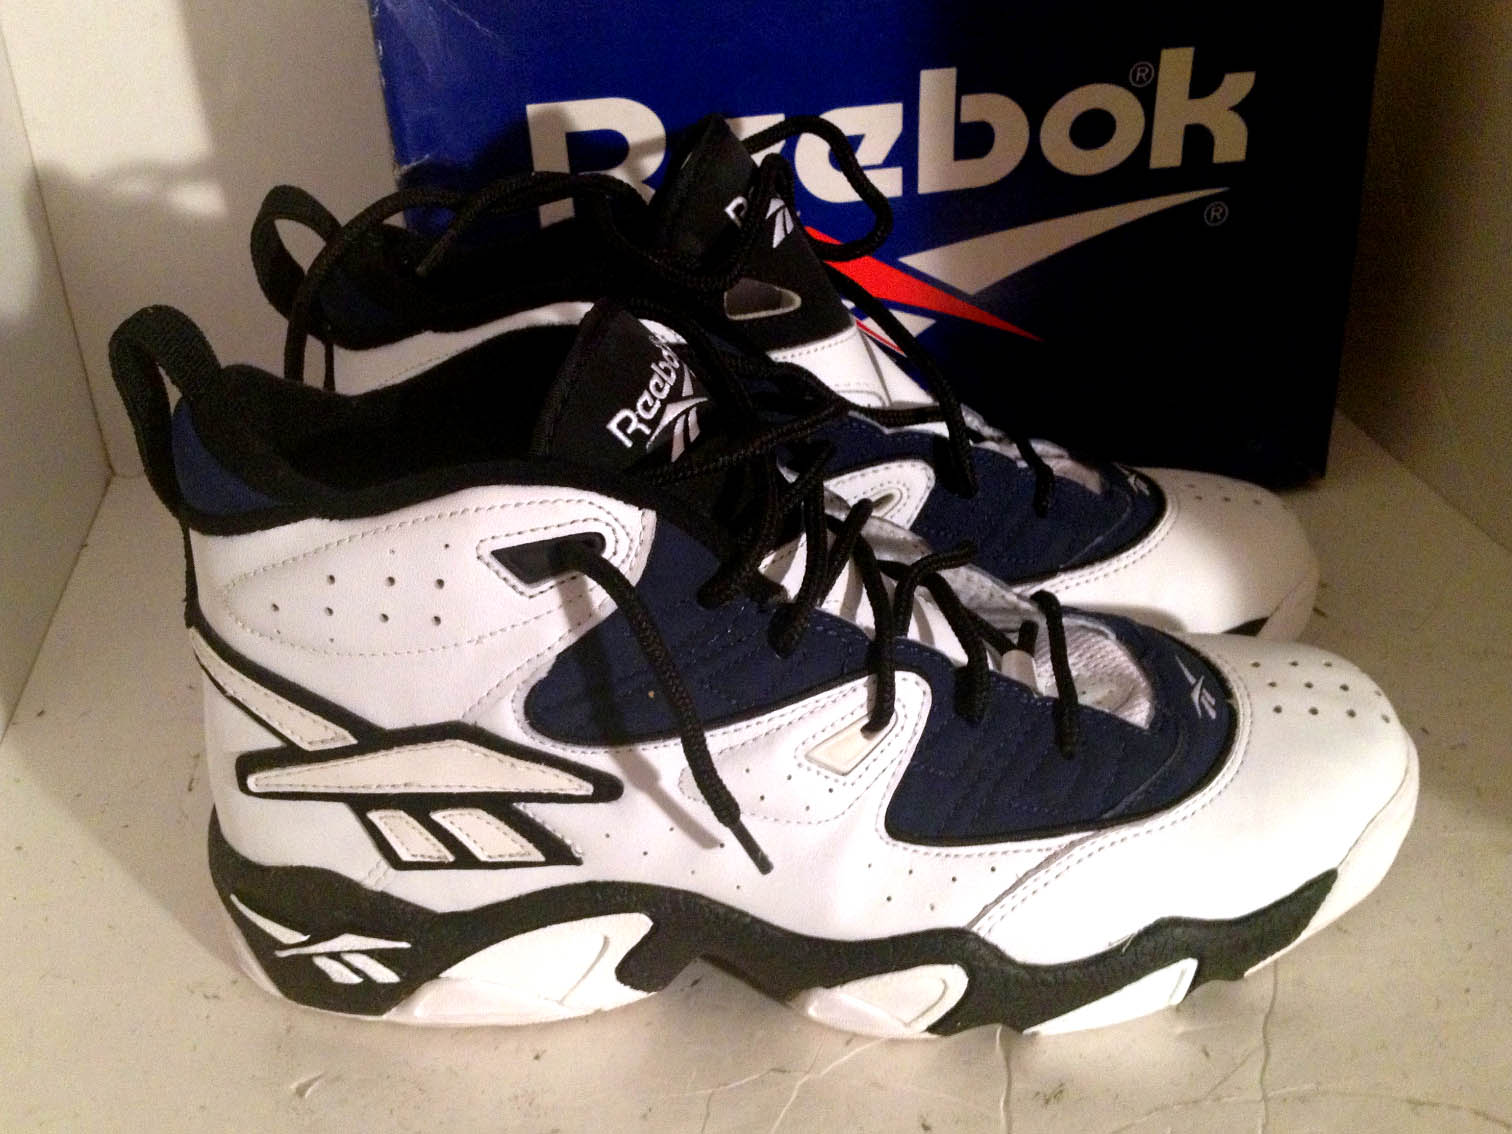 Top Ten Reebok Basketball Shoes That Need to Re-Release | Sole Collector